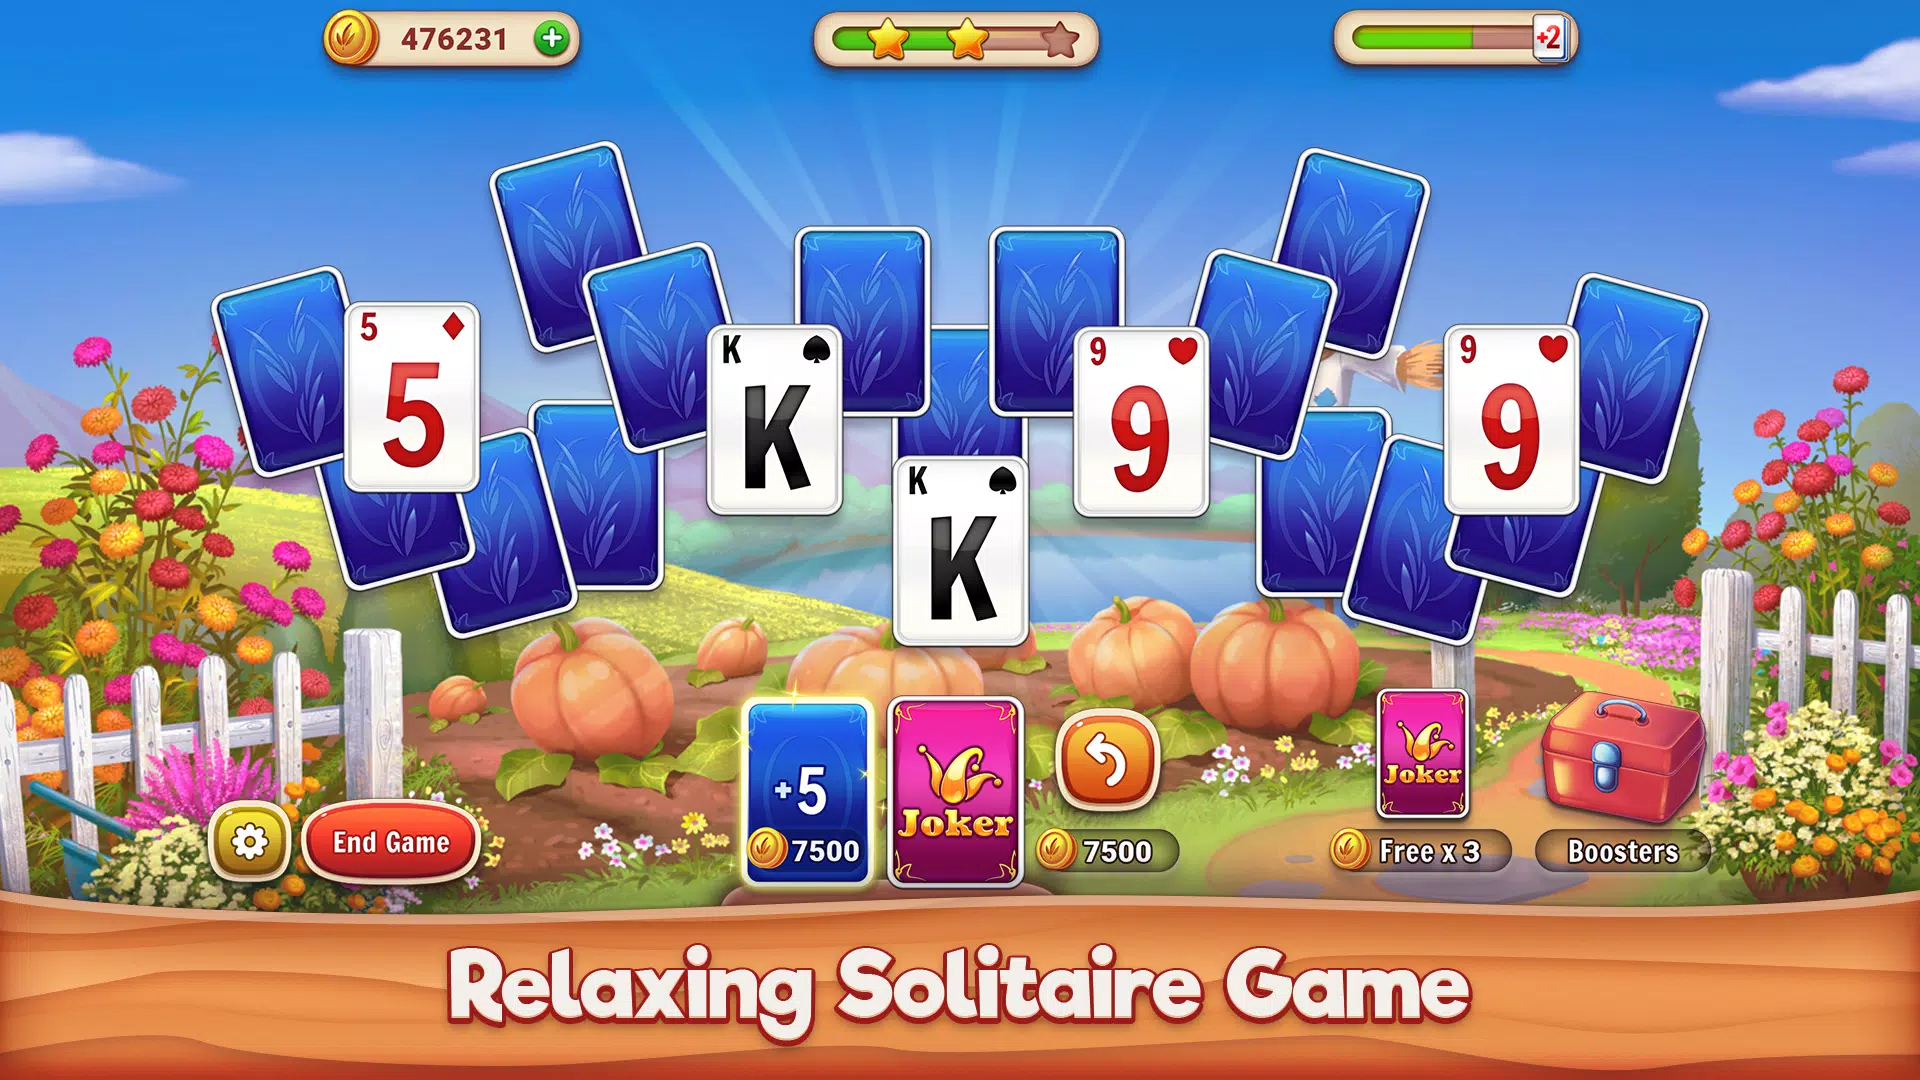 Solitaire Grand Harvest - Apps on Google Play